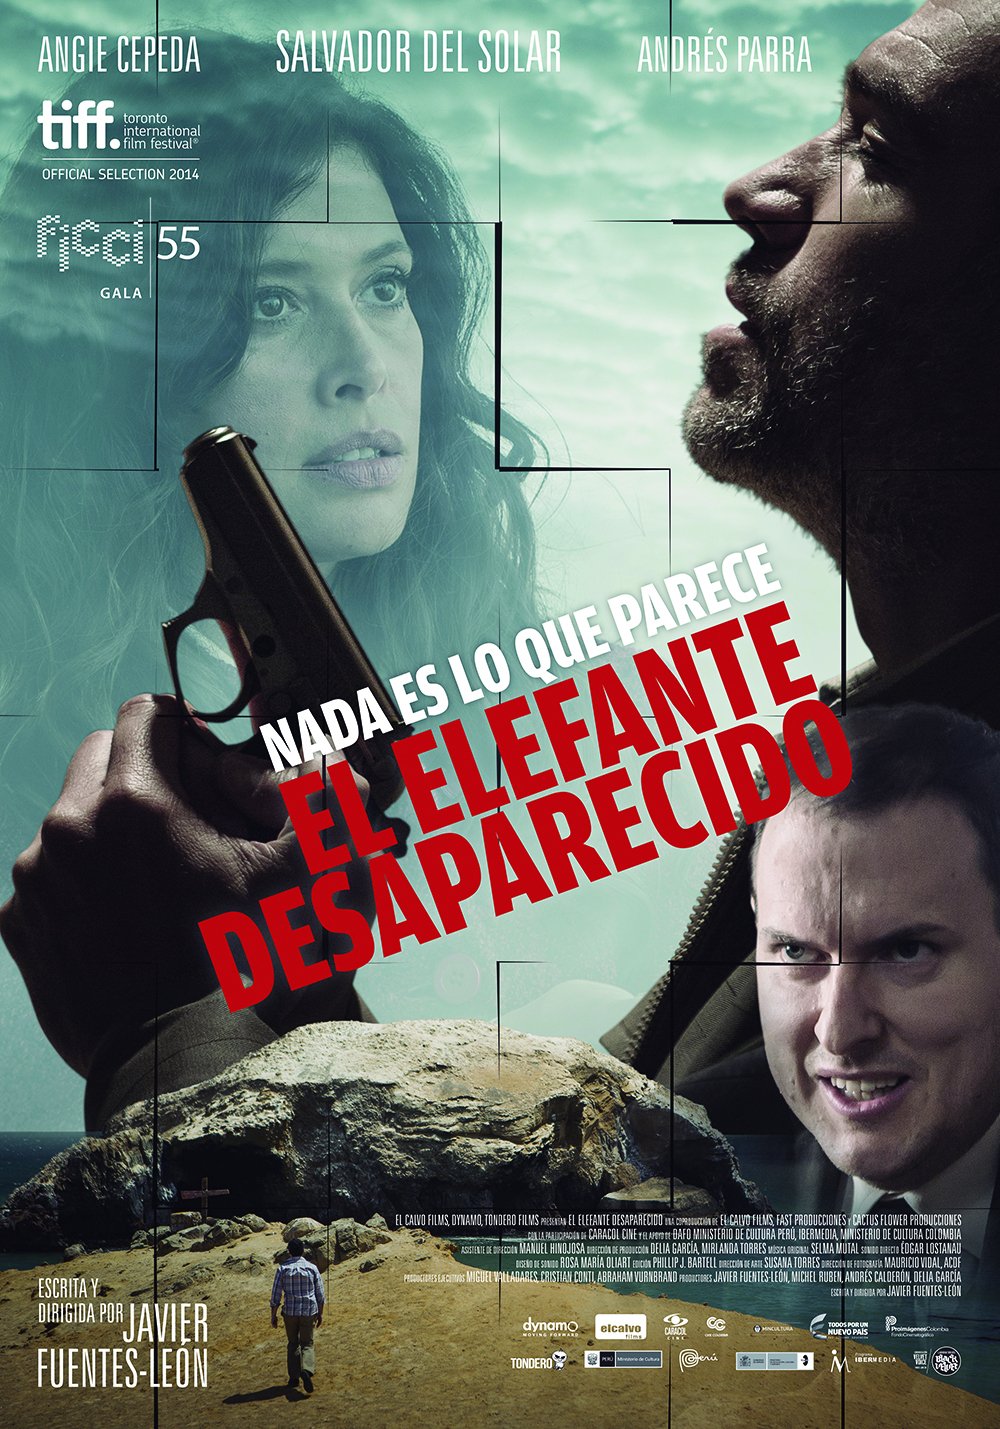 Spanish poster of the movie The Vanished Elephant